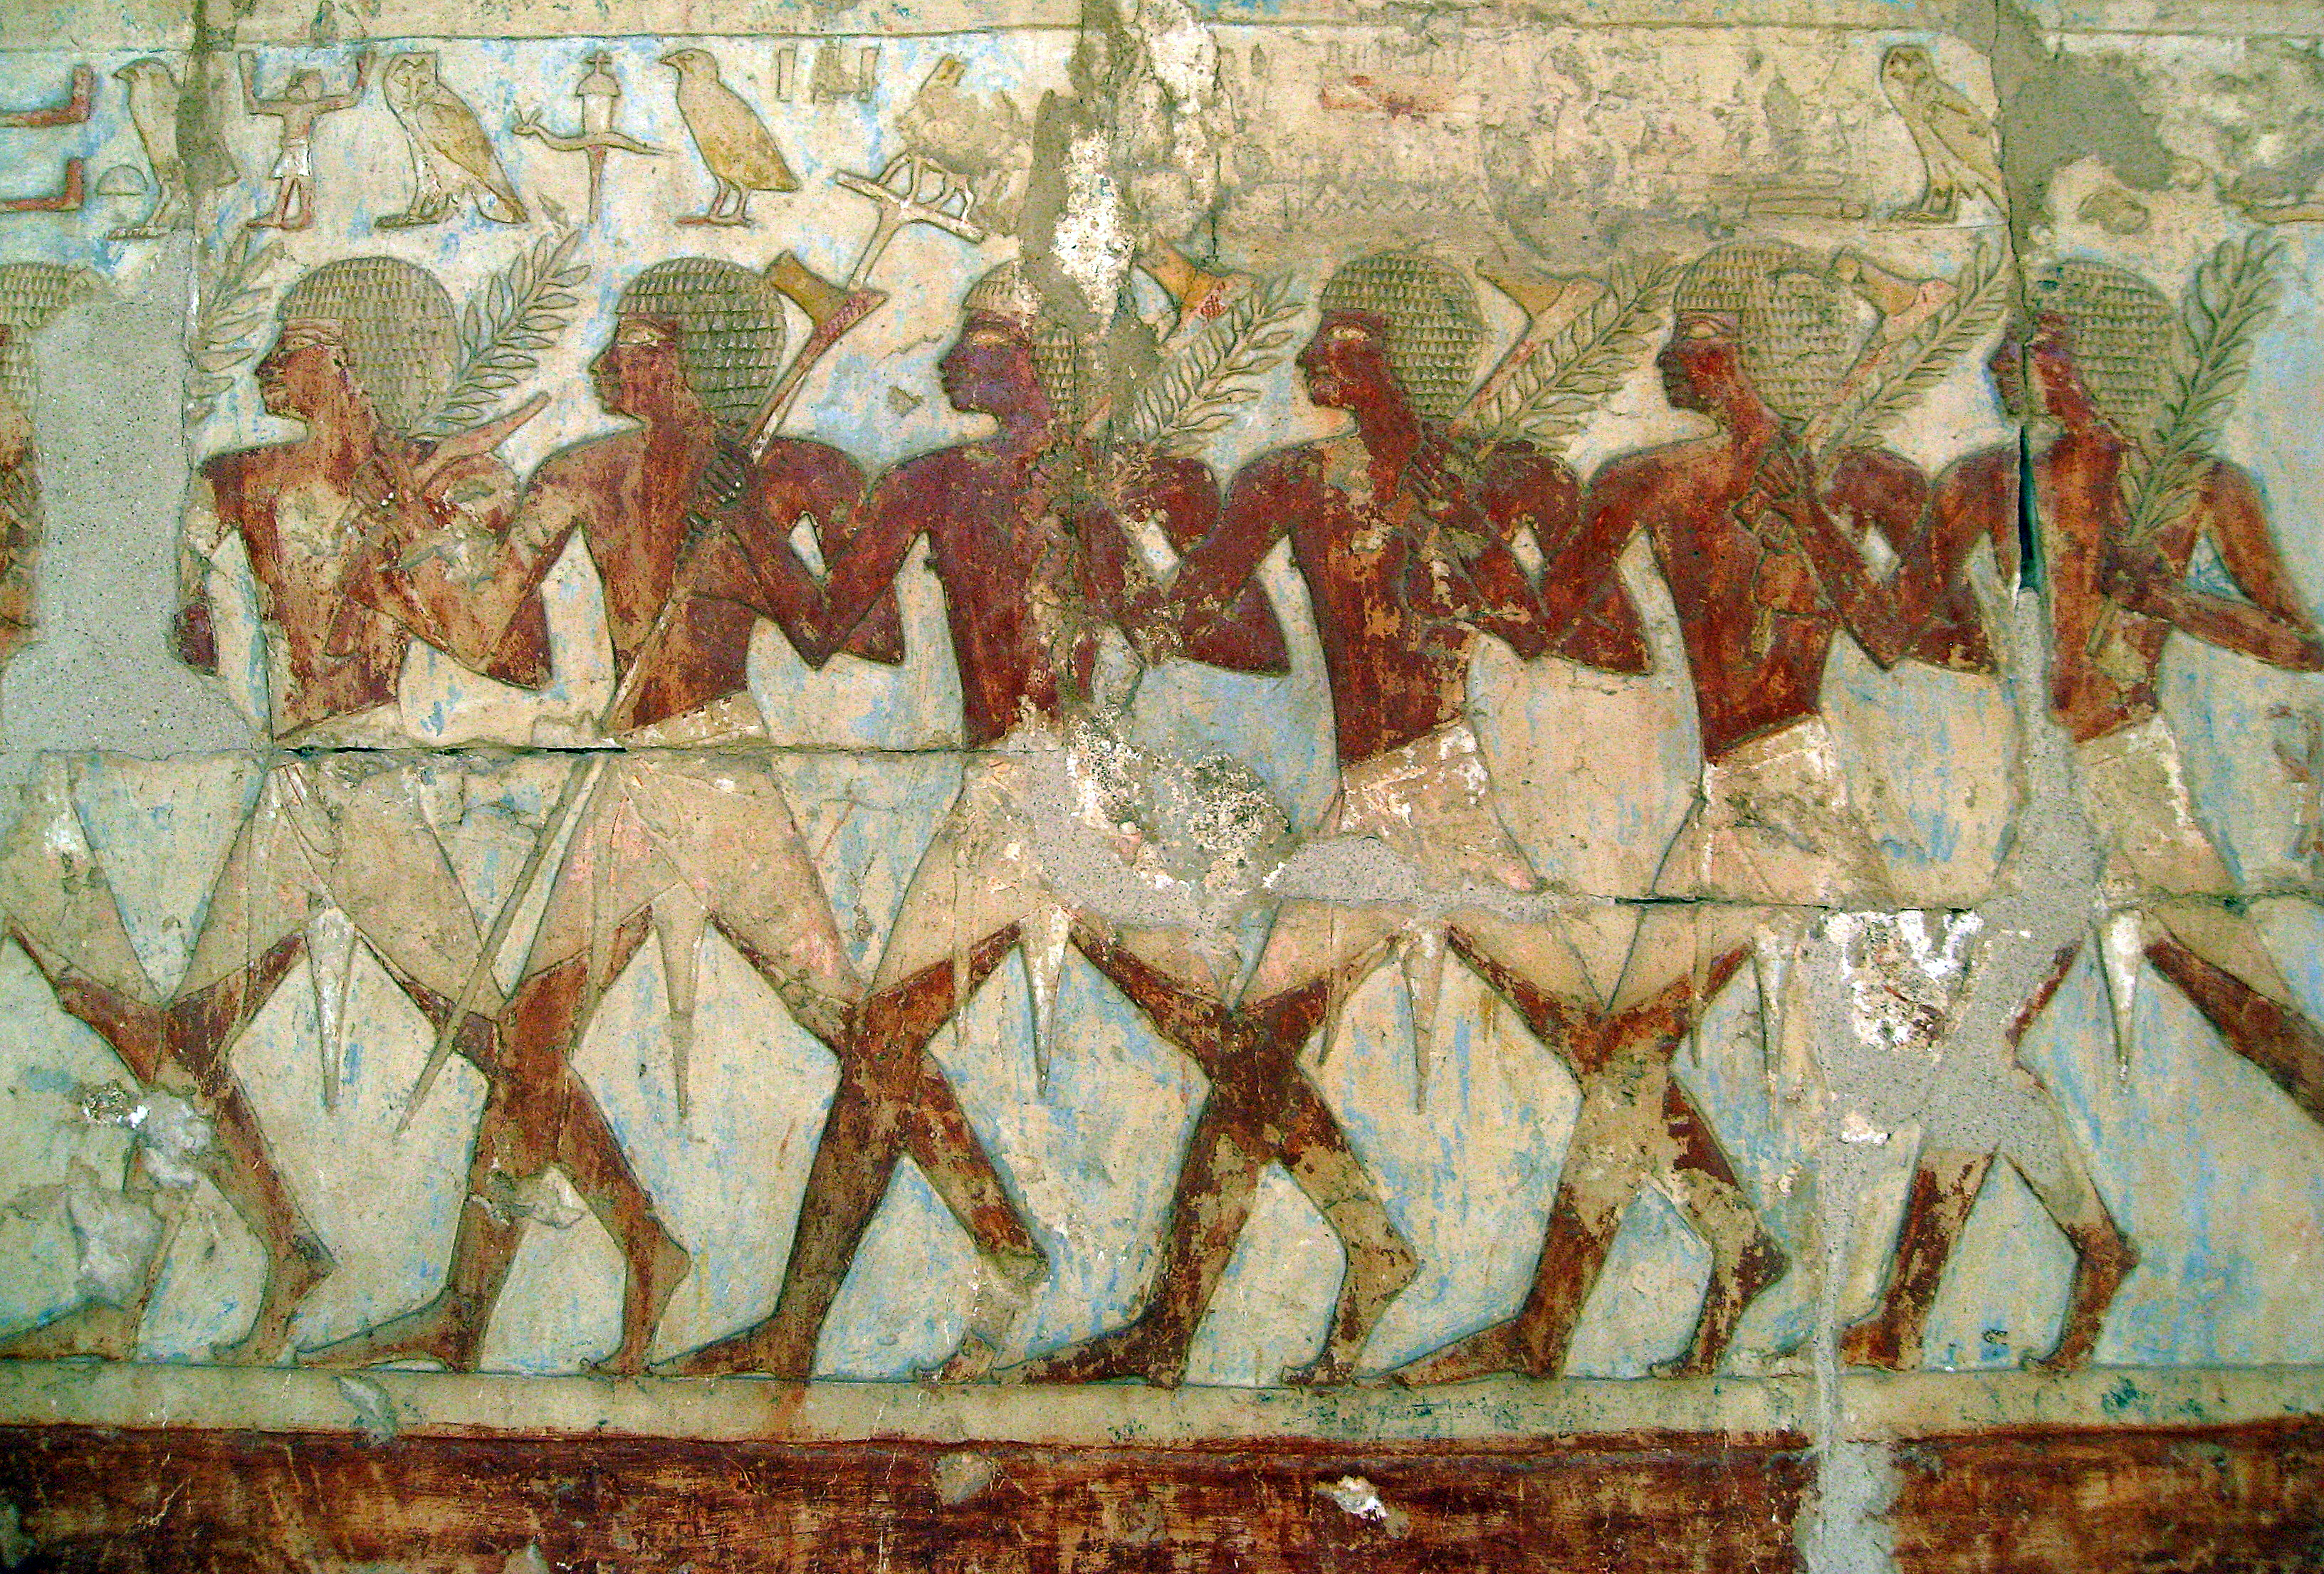 Relief_of_Hatshepsut%27s_expedition_to_the_Land_of_Punt_by_%CE%A3%CF%84%CE%B1%CF%8D%CF%81%CE%BF%CF%82.jpg